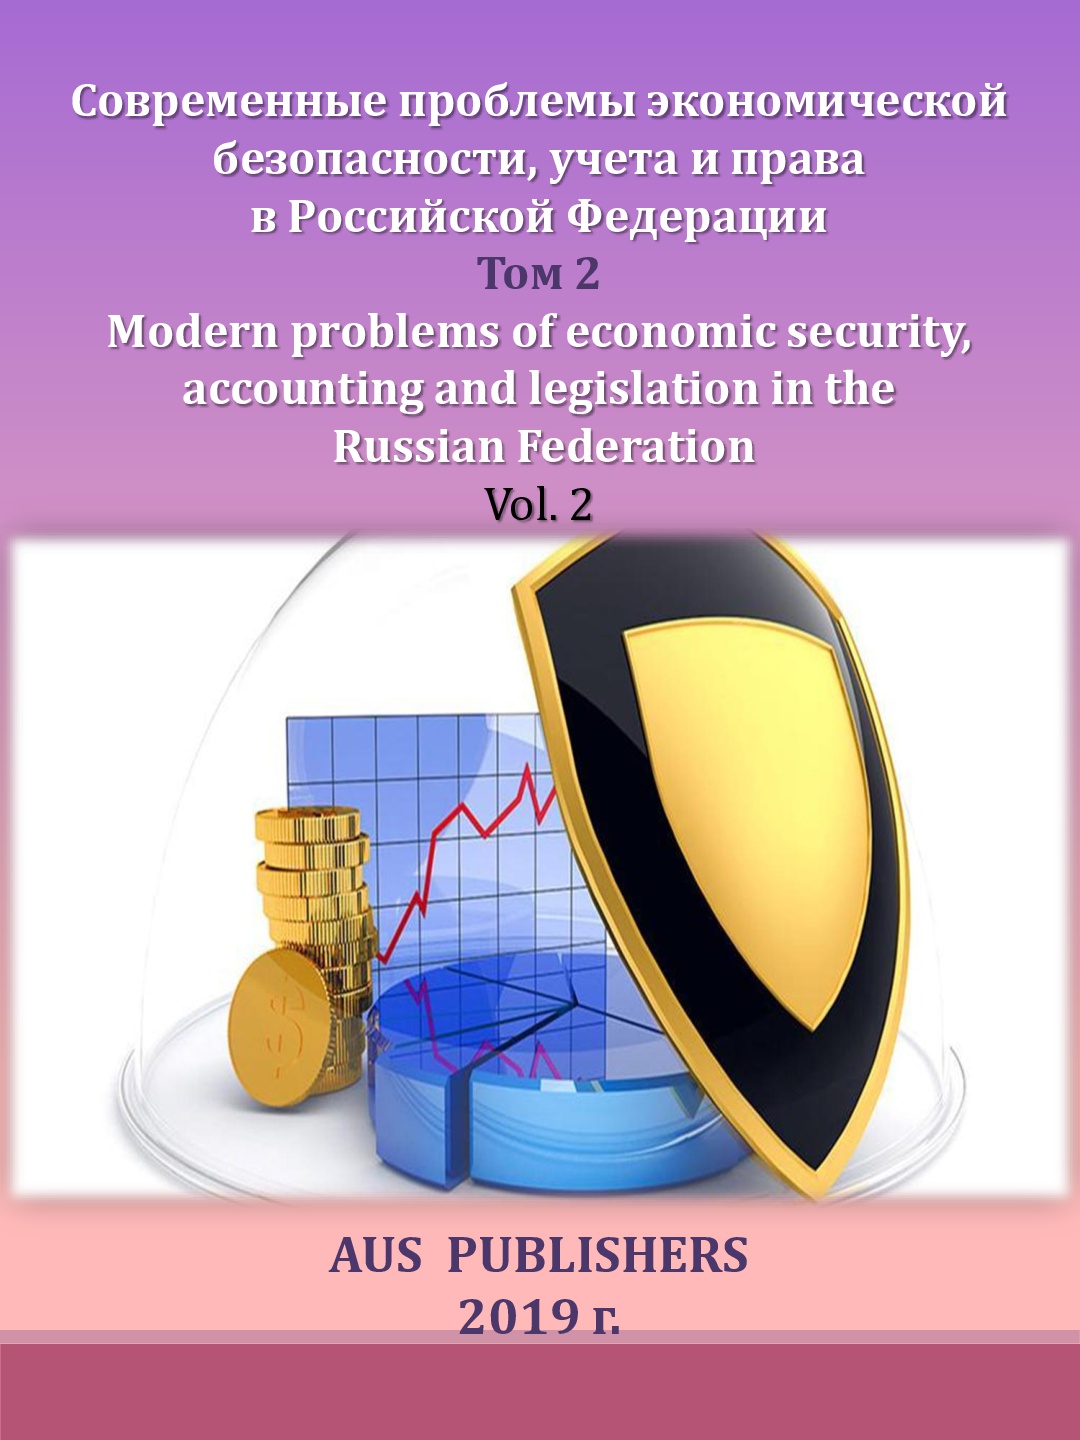                         STRUCTURE, VALUE AND MAIN WAYS OF INCREASING THE COLLABILITY OF NON-TAX REVENUES OF THE RUSSIAN FEDERATION
            